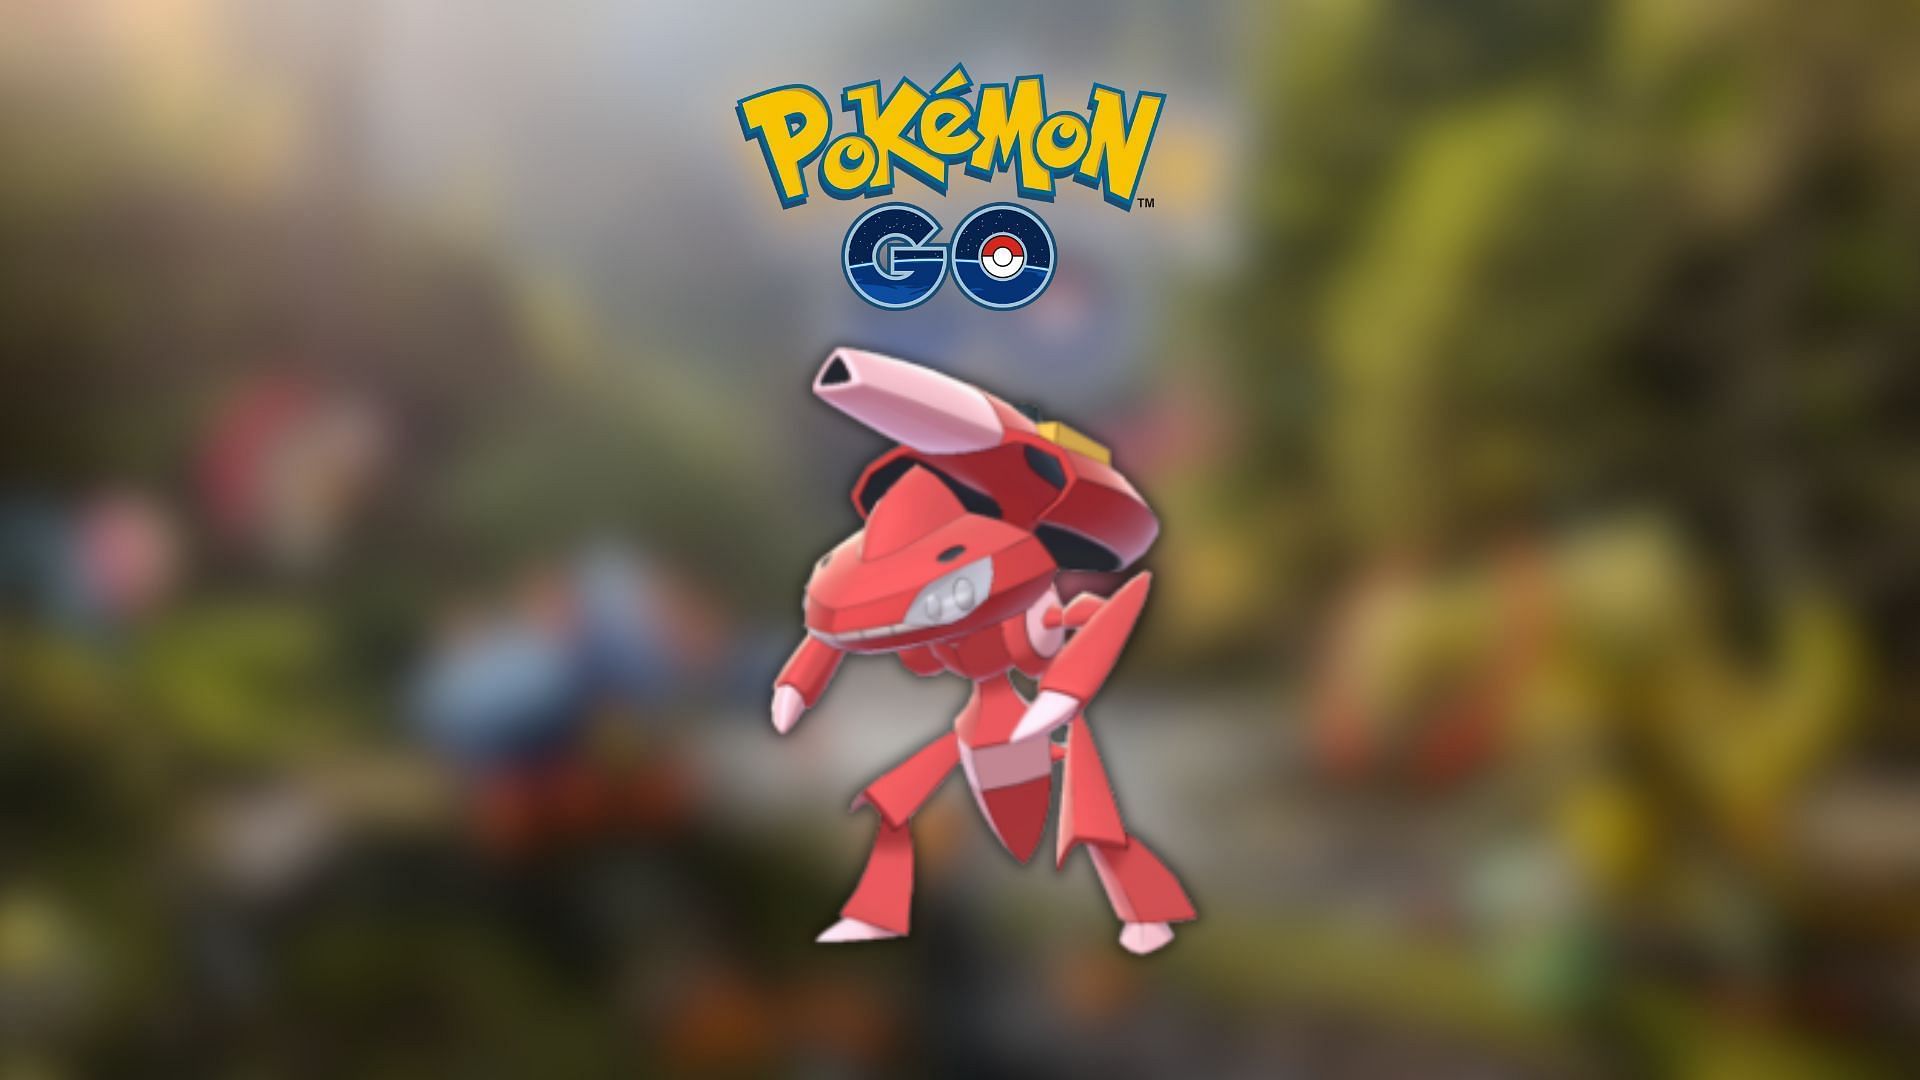 Pokemon Go Genesect Raid Guide: Best Counters, Weaknesses and